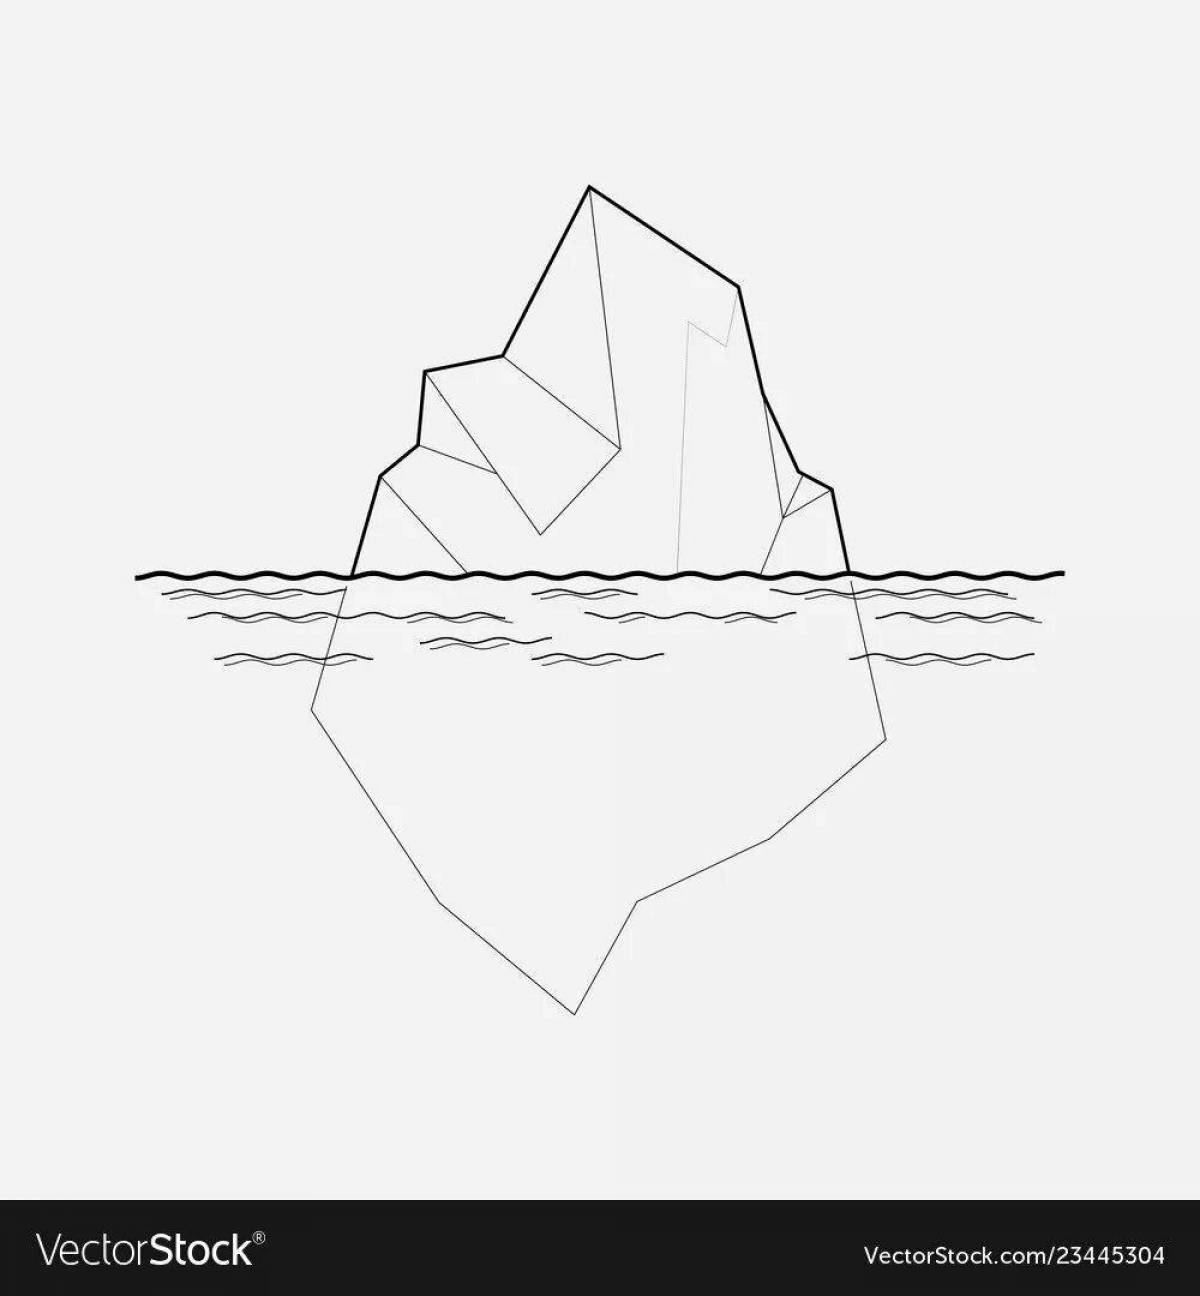 Flawless iceberg coloring page